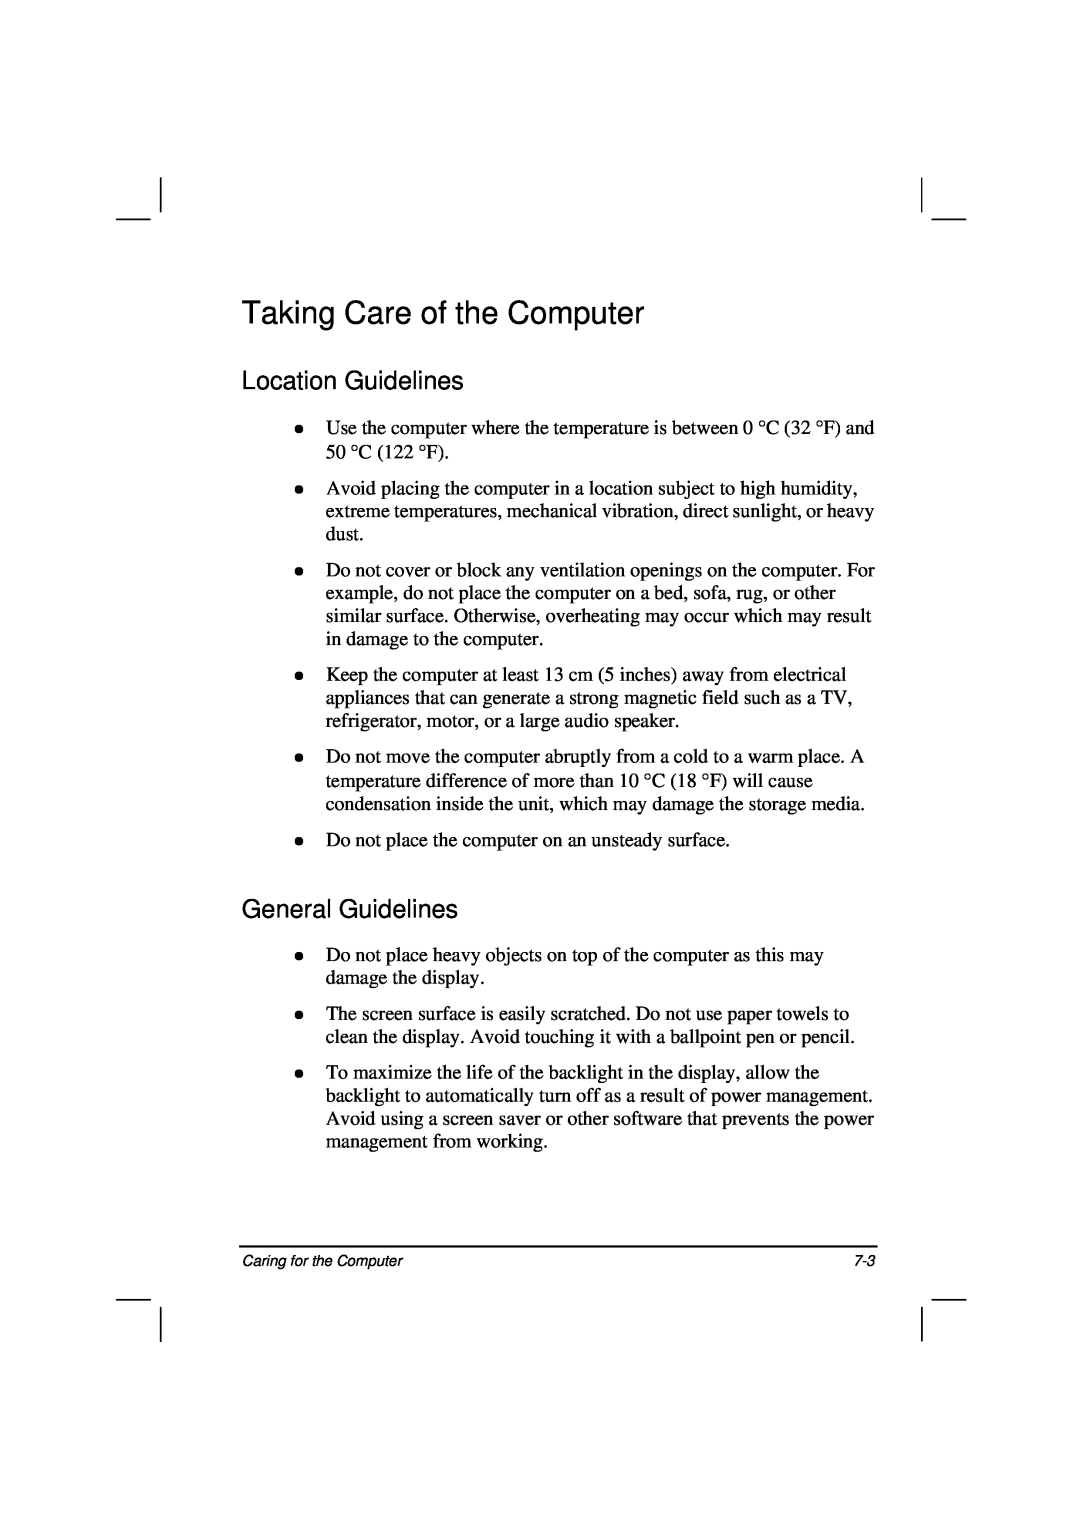 Casio HK1223 owner manual Taking Care of the Computer, Location Guidelines, General Guidelines 